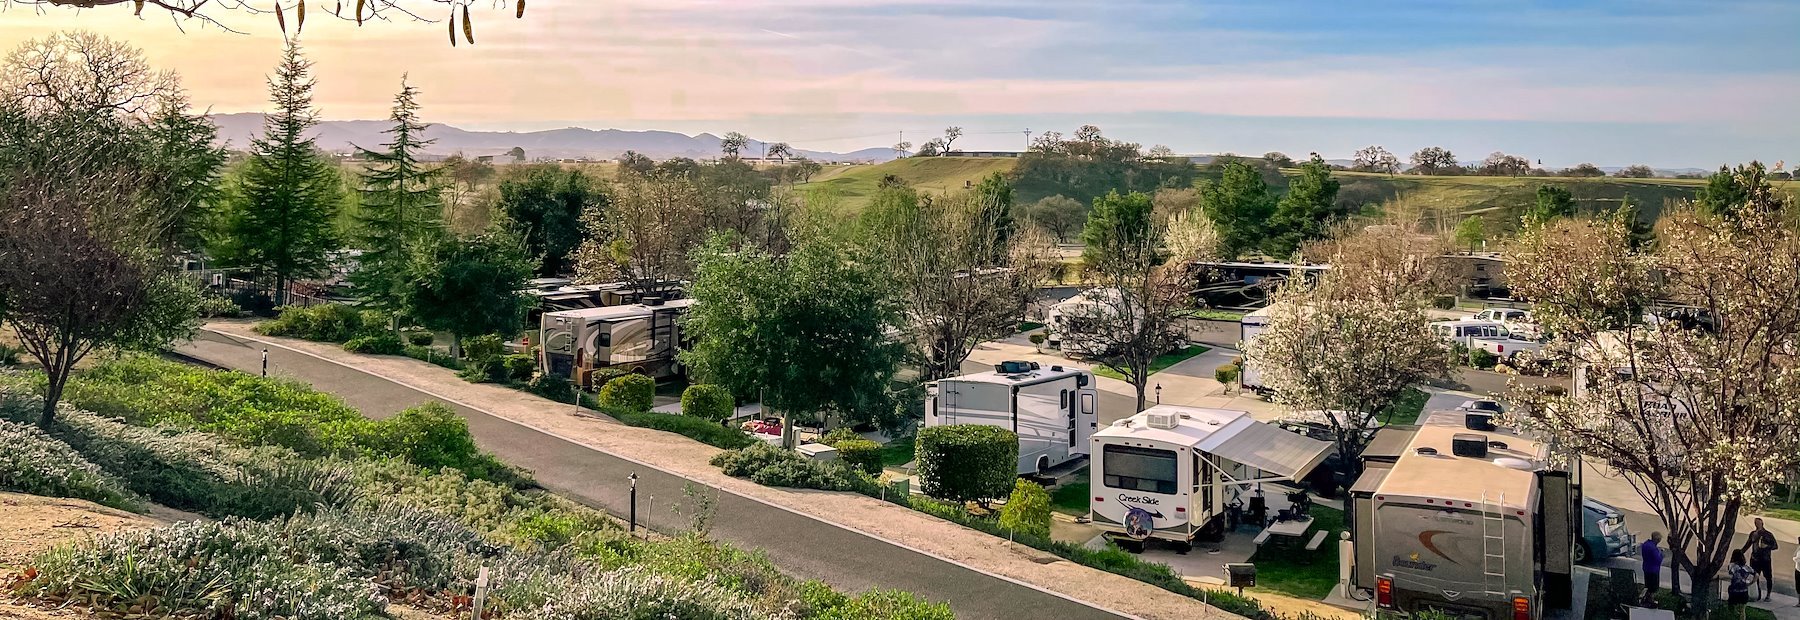 RV Resort in Paso Robles, CA - Sun Outdoors Central Coast Wine Country